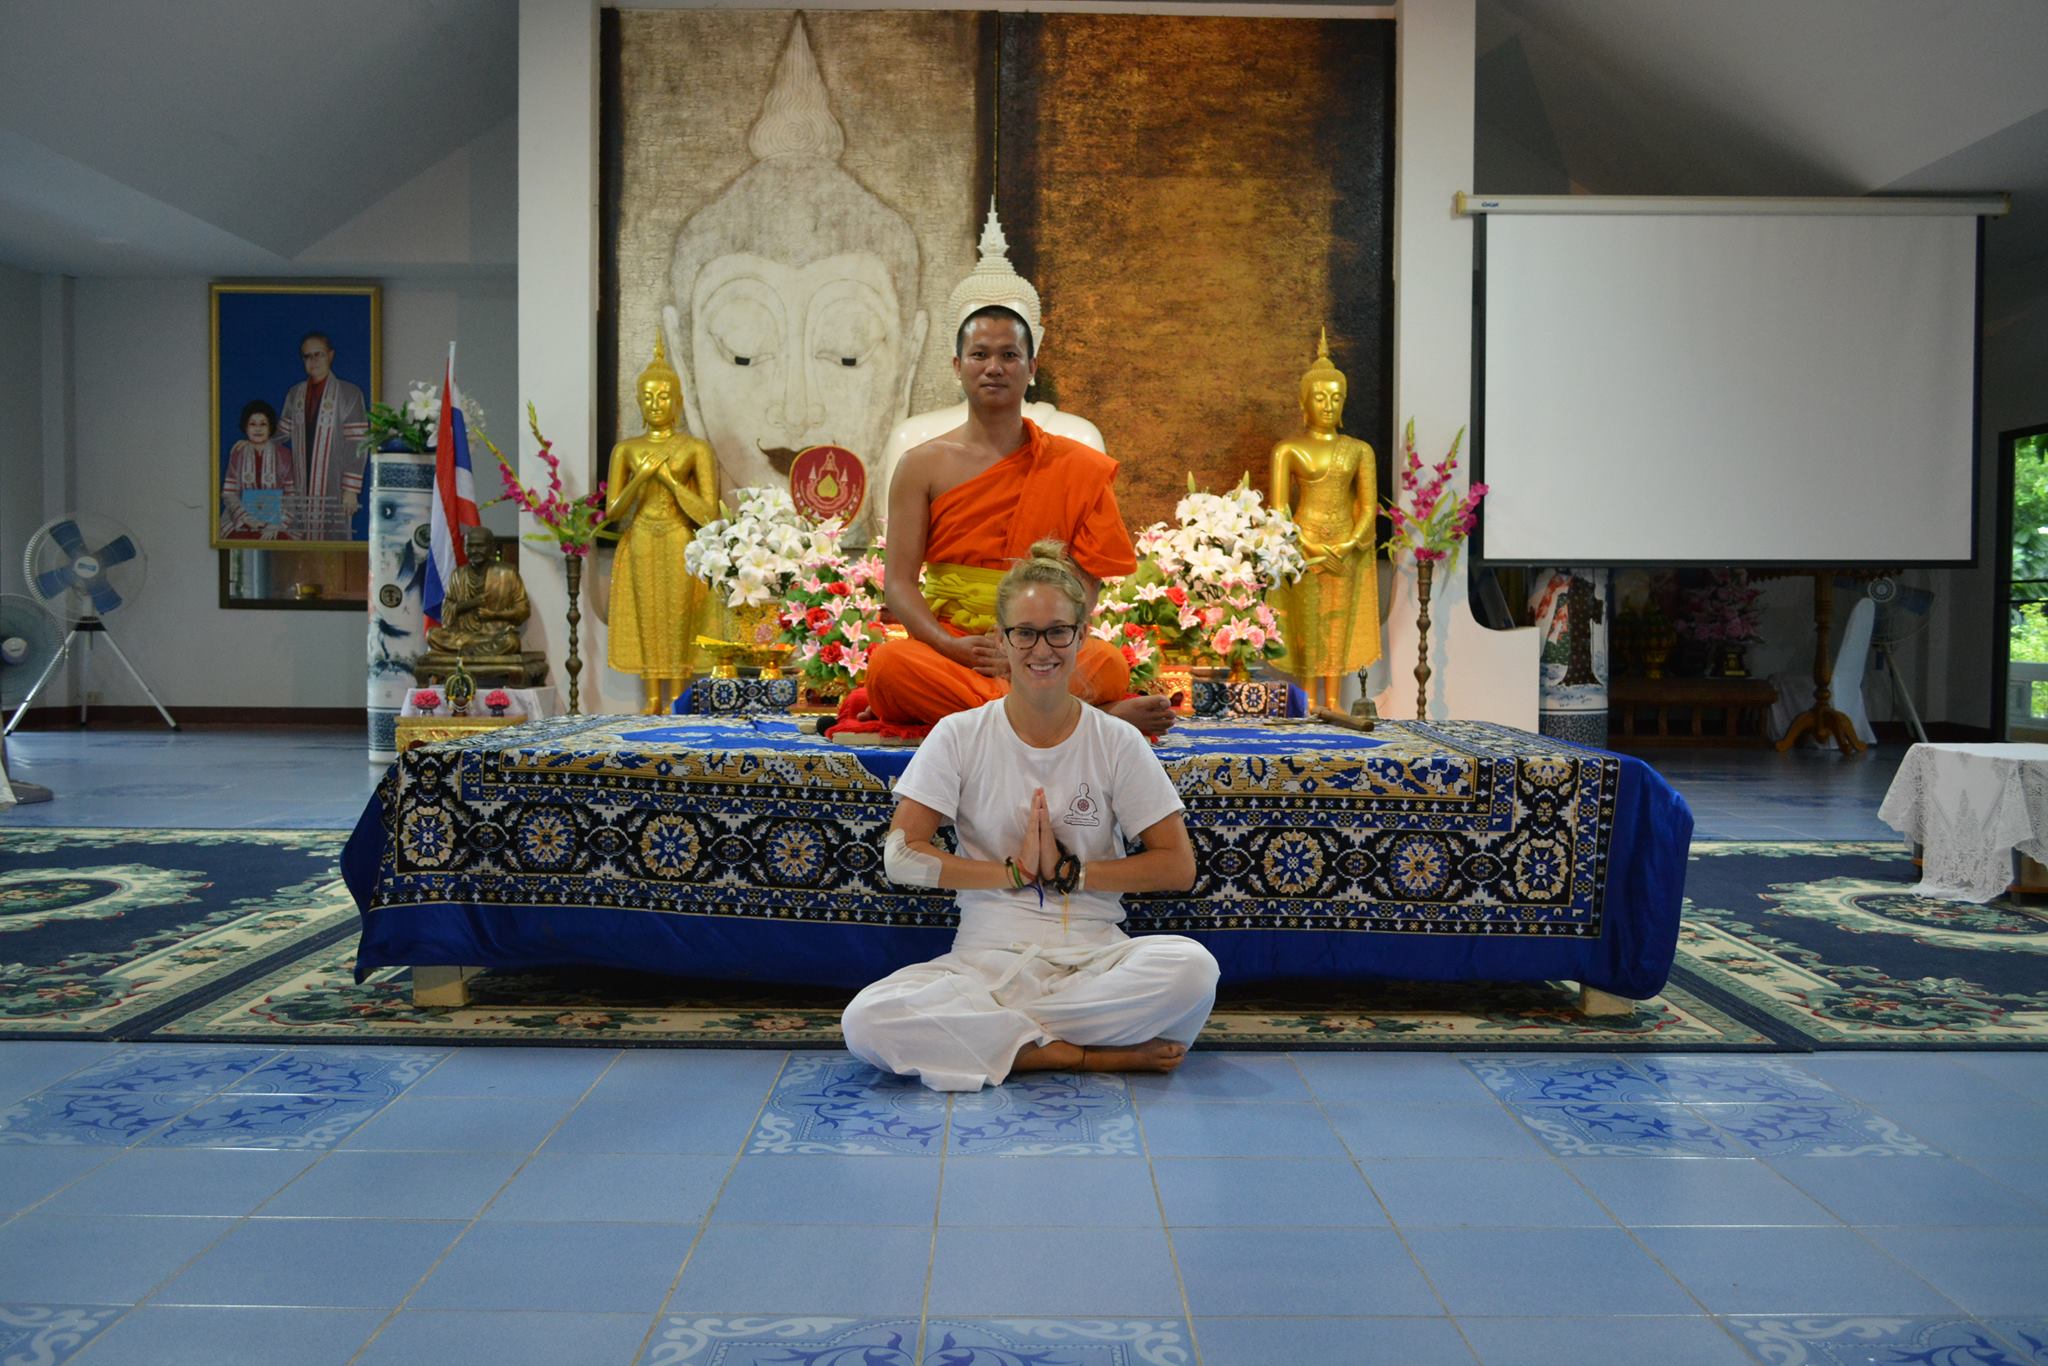 Posing for a photo with our meditation instructor and monk of 30 years.